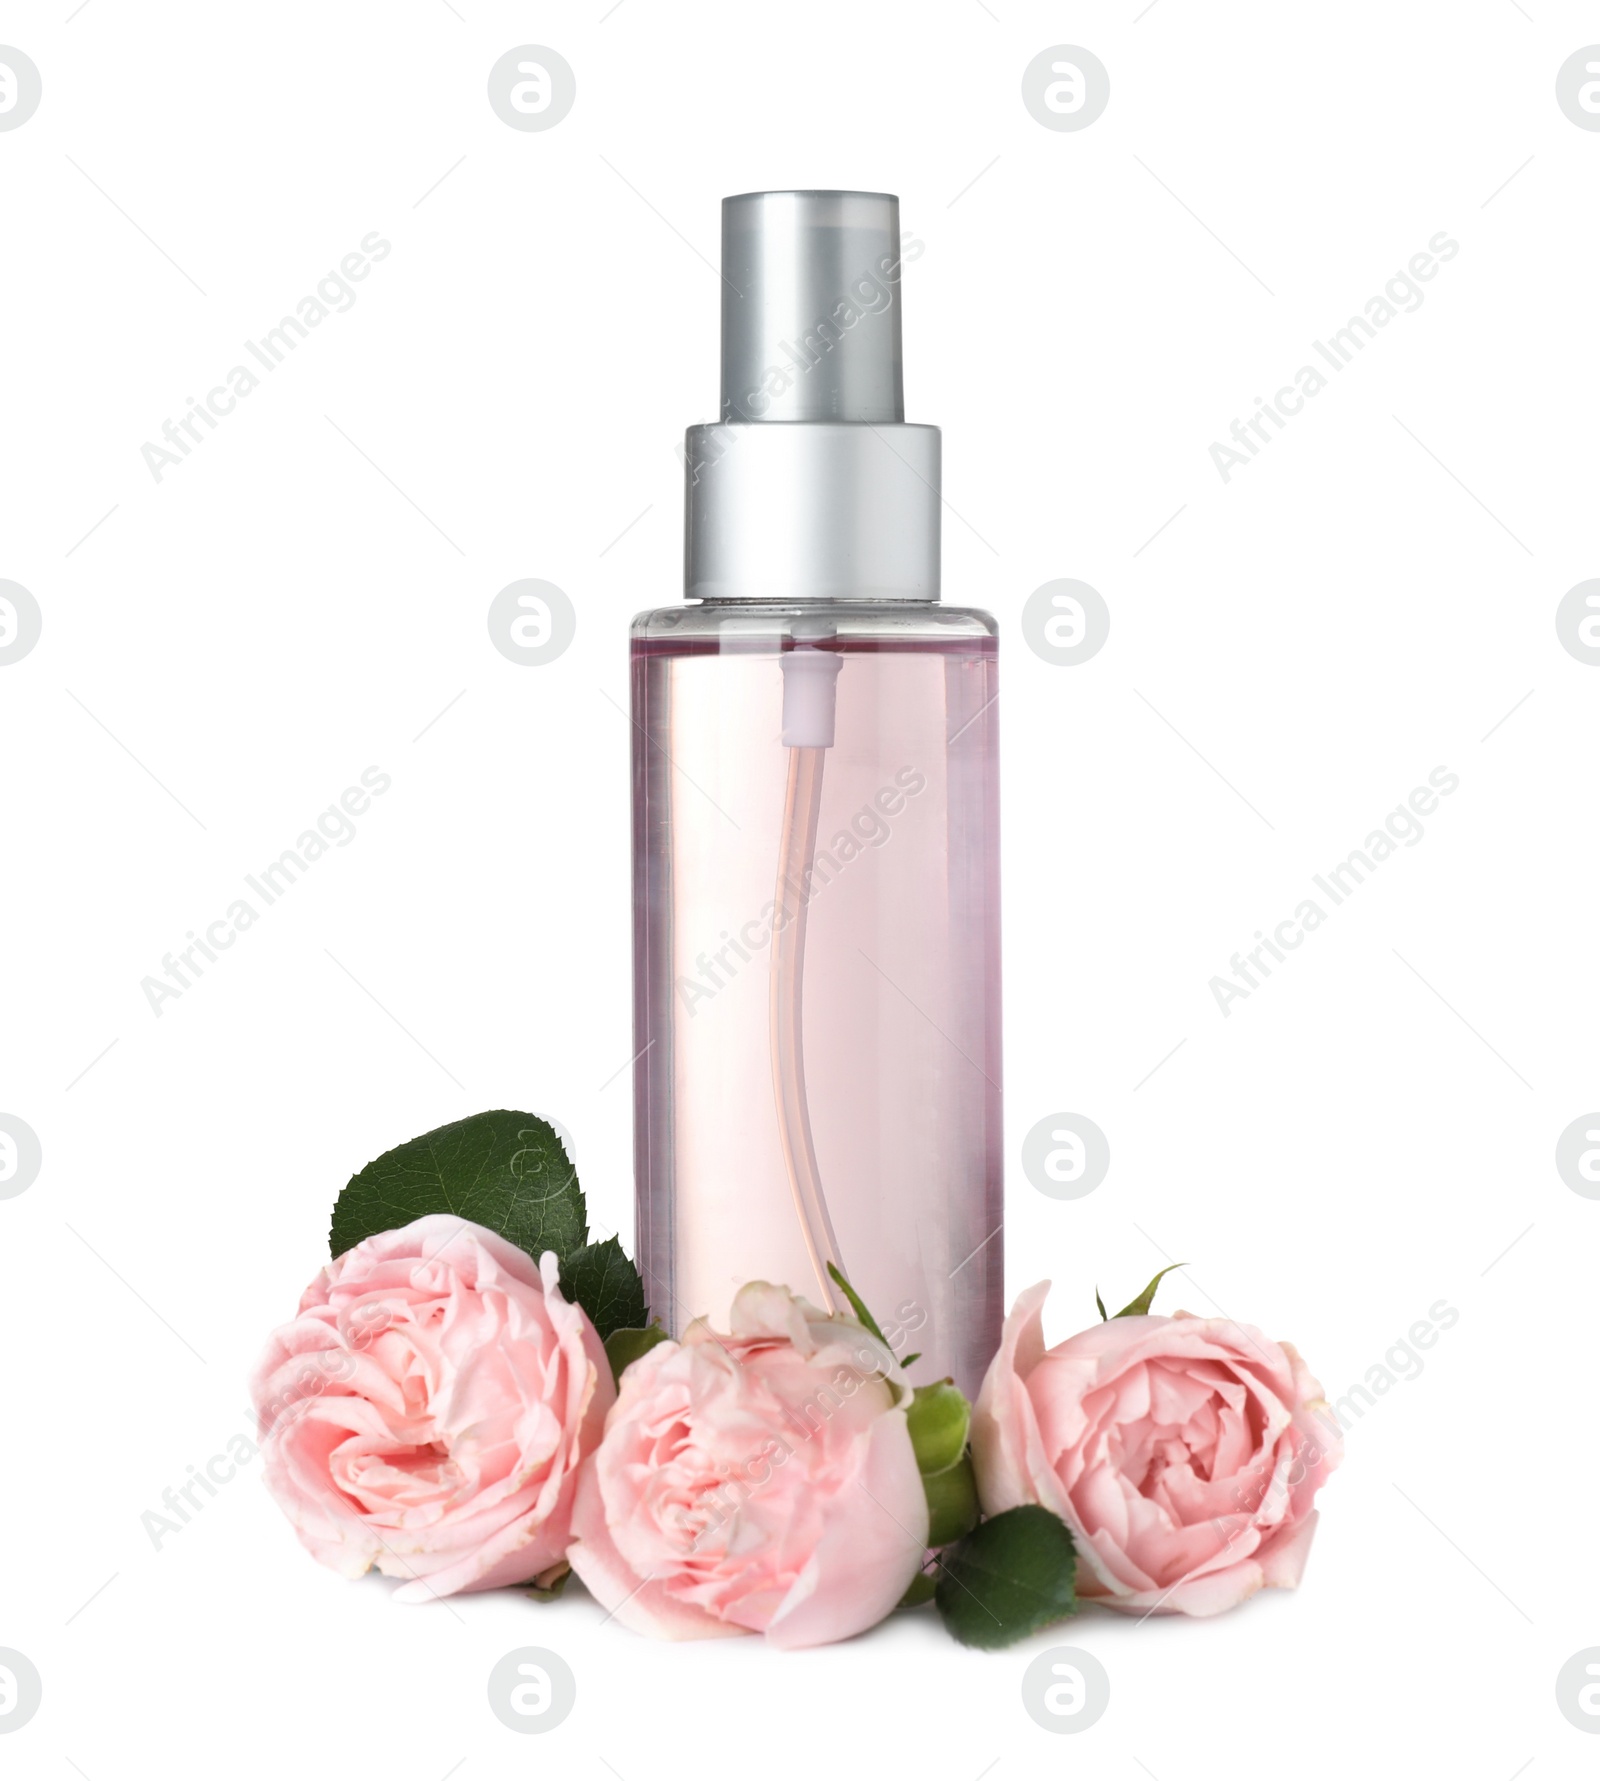 Photo of Bottle with rose essential oil and flowers on white background